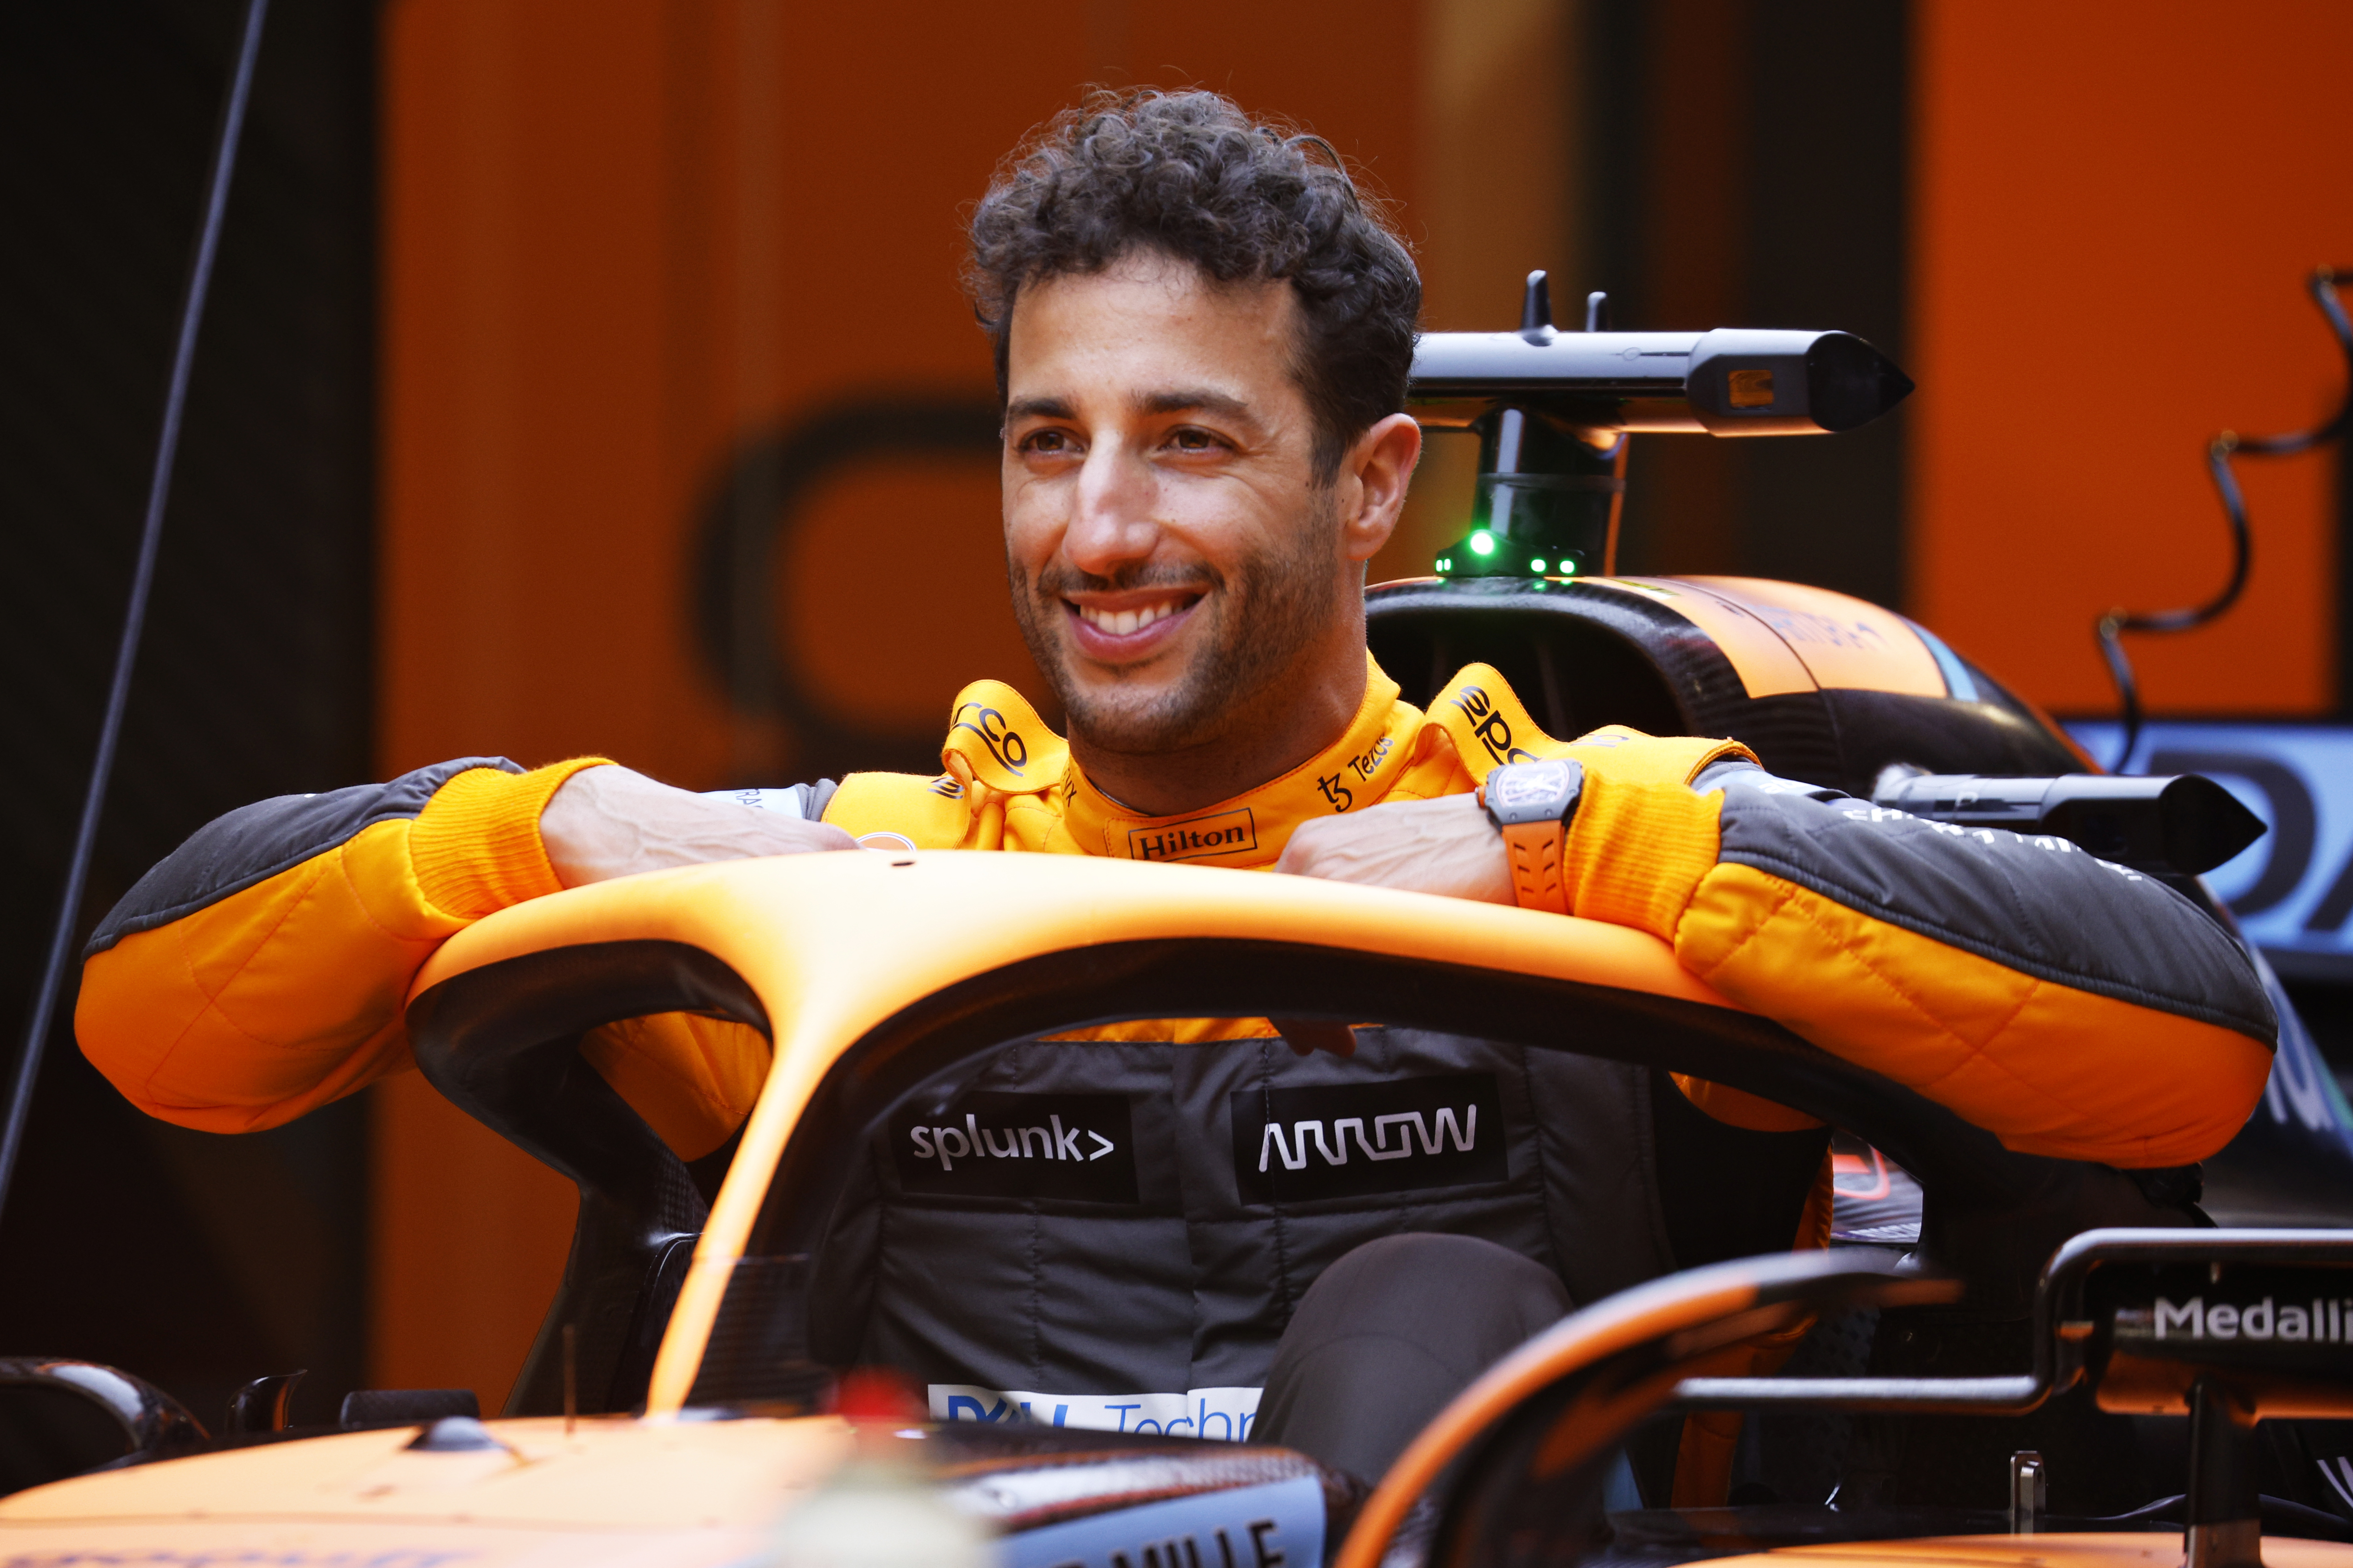 Daniel Ricciardo was investigated for breaking the rules as Ferrari's Charles Leclerc led the first practice at the Miami GP